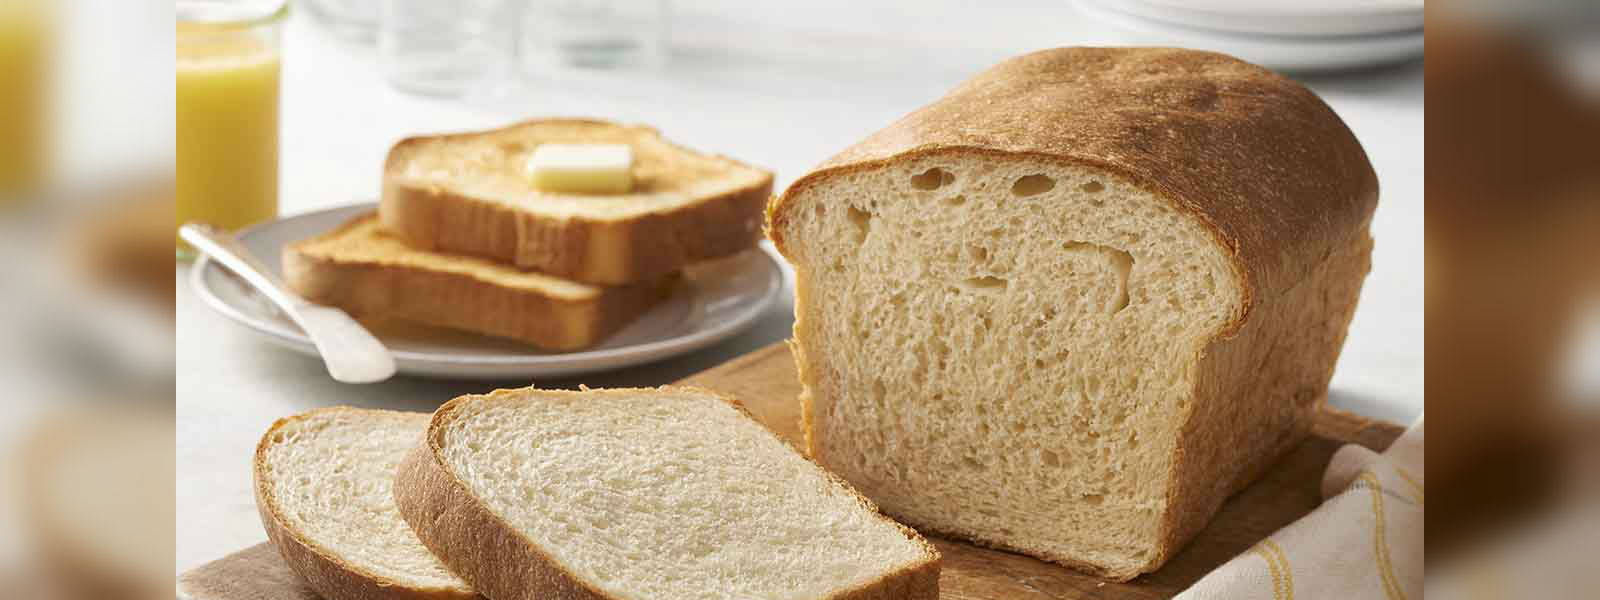 Price of bread to be increased by Rs 5 from midnight